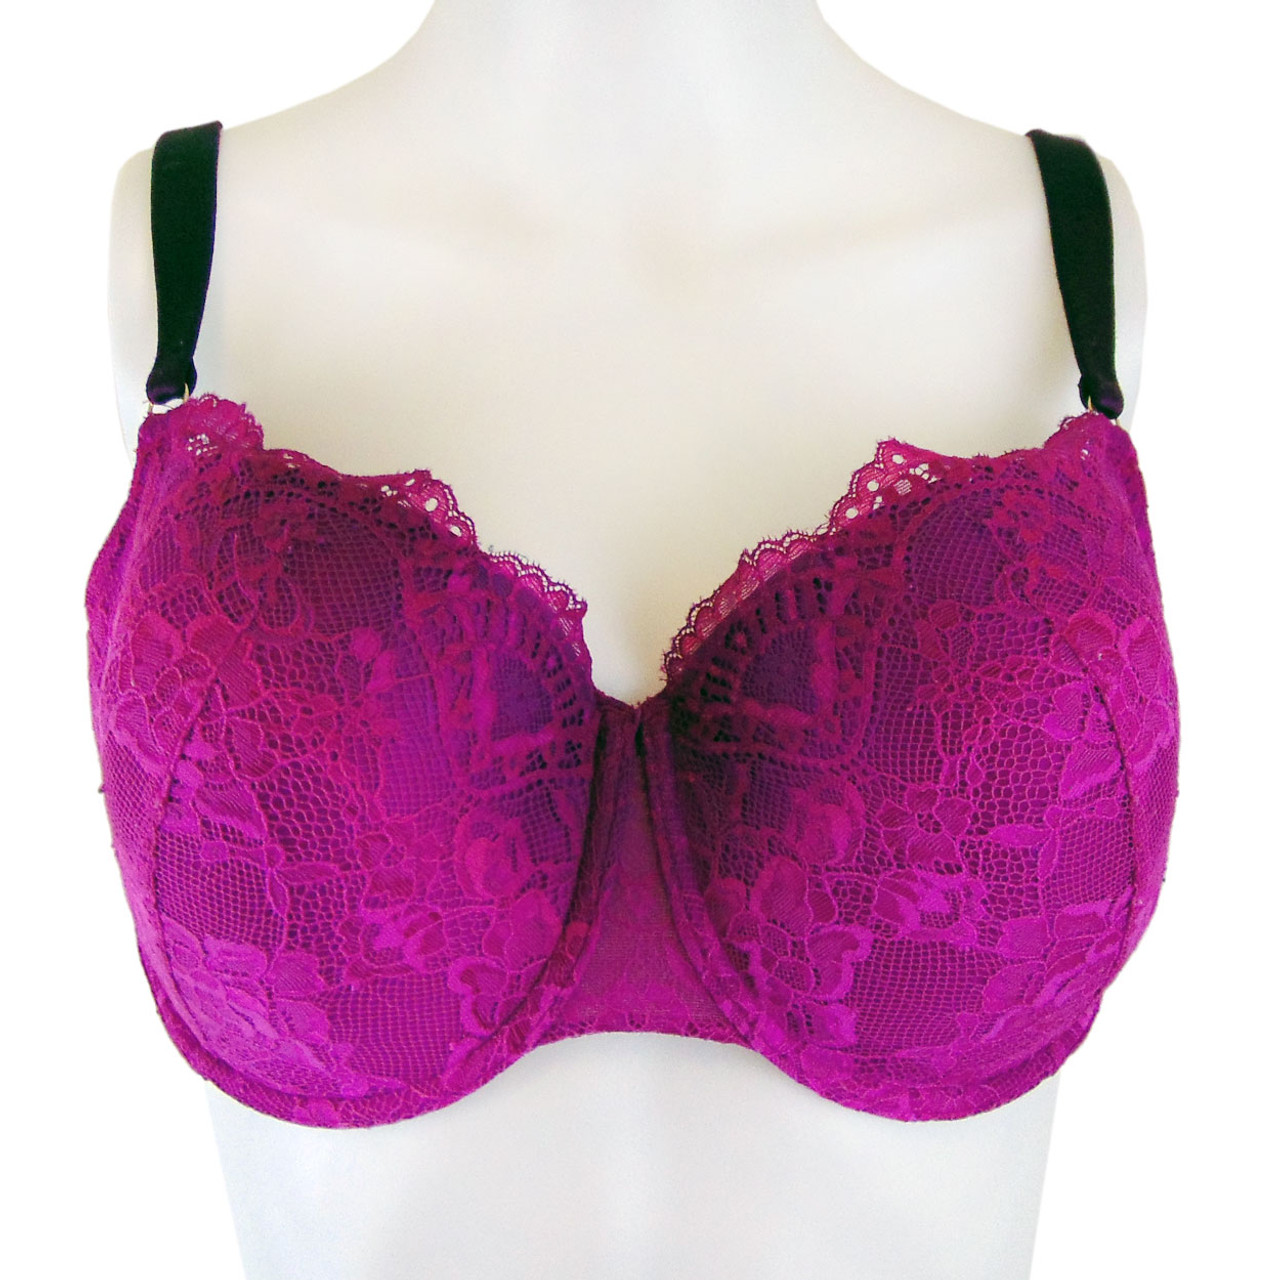 La Senza Pink Lace and Mesh Underwire Bra - Size 34DDD  Onestop-Thriftshop  Consignment and Discount Bouitique